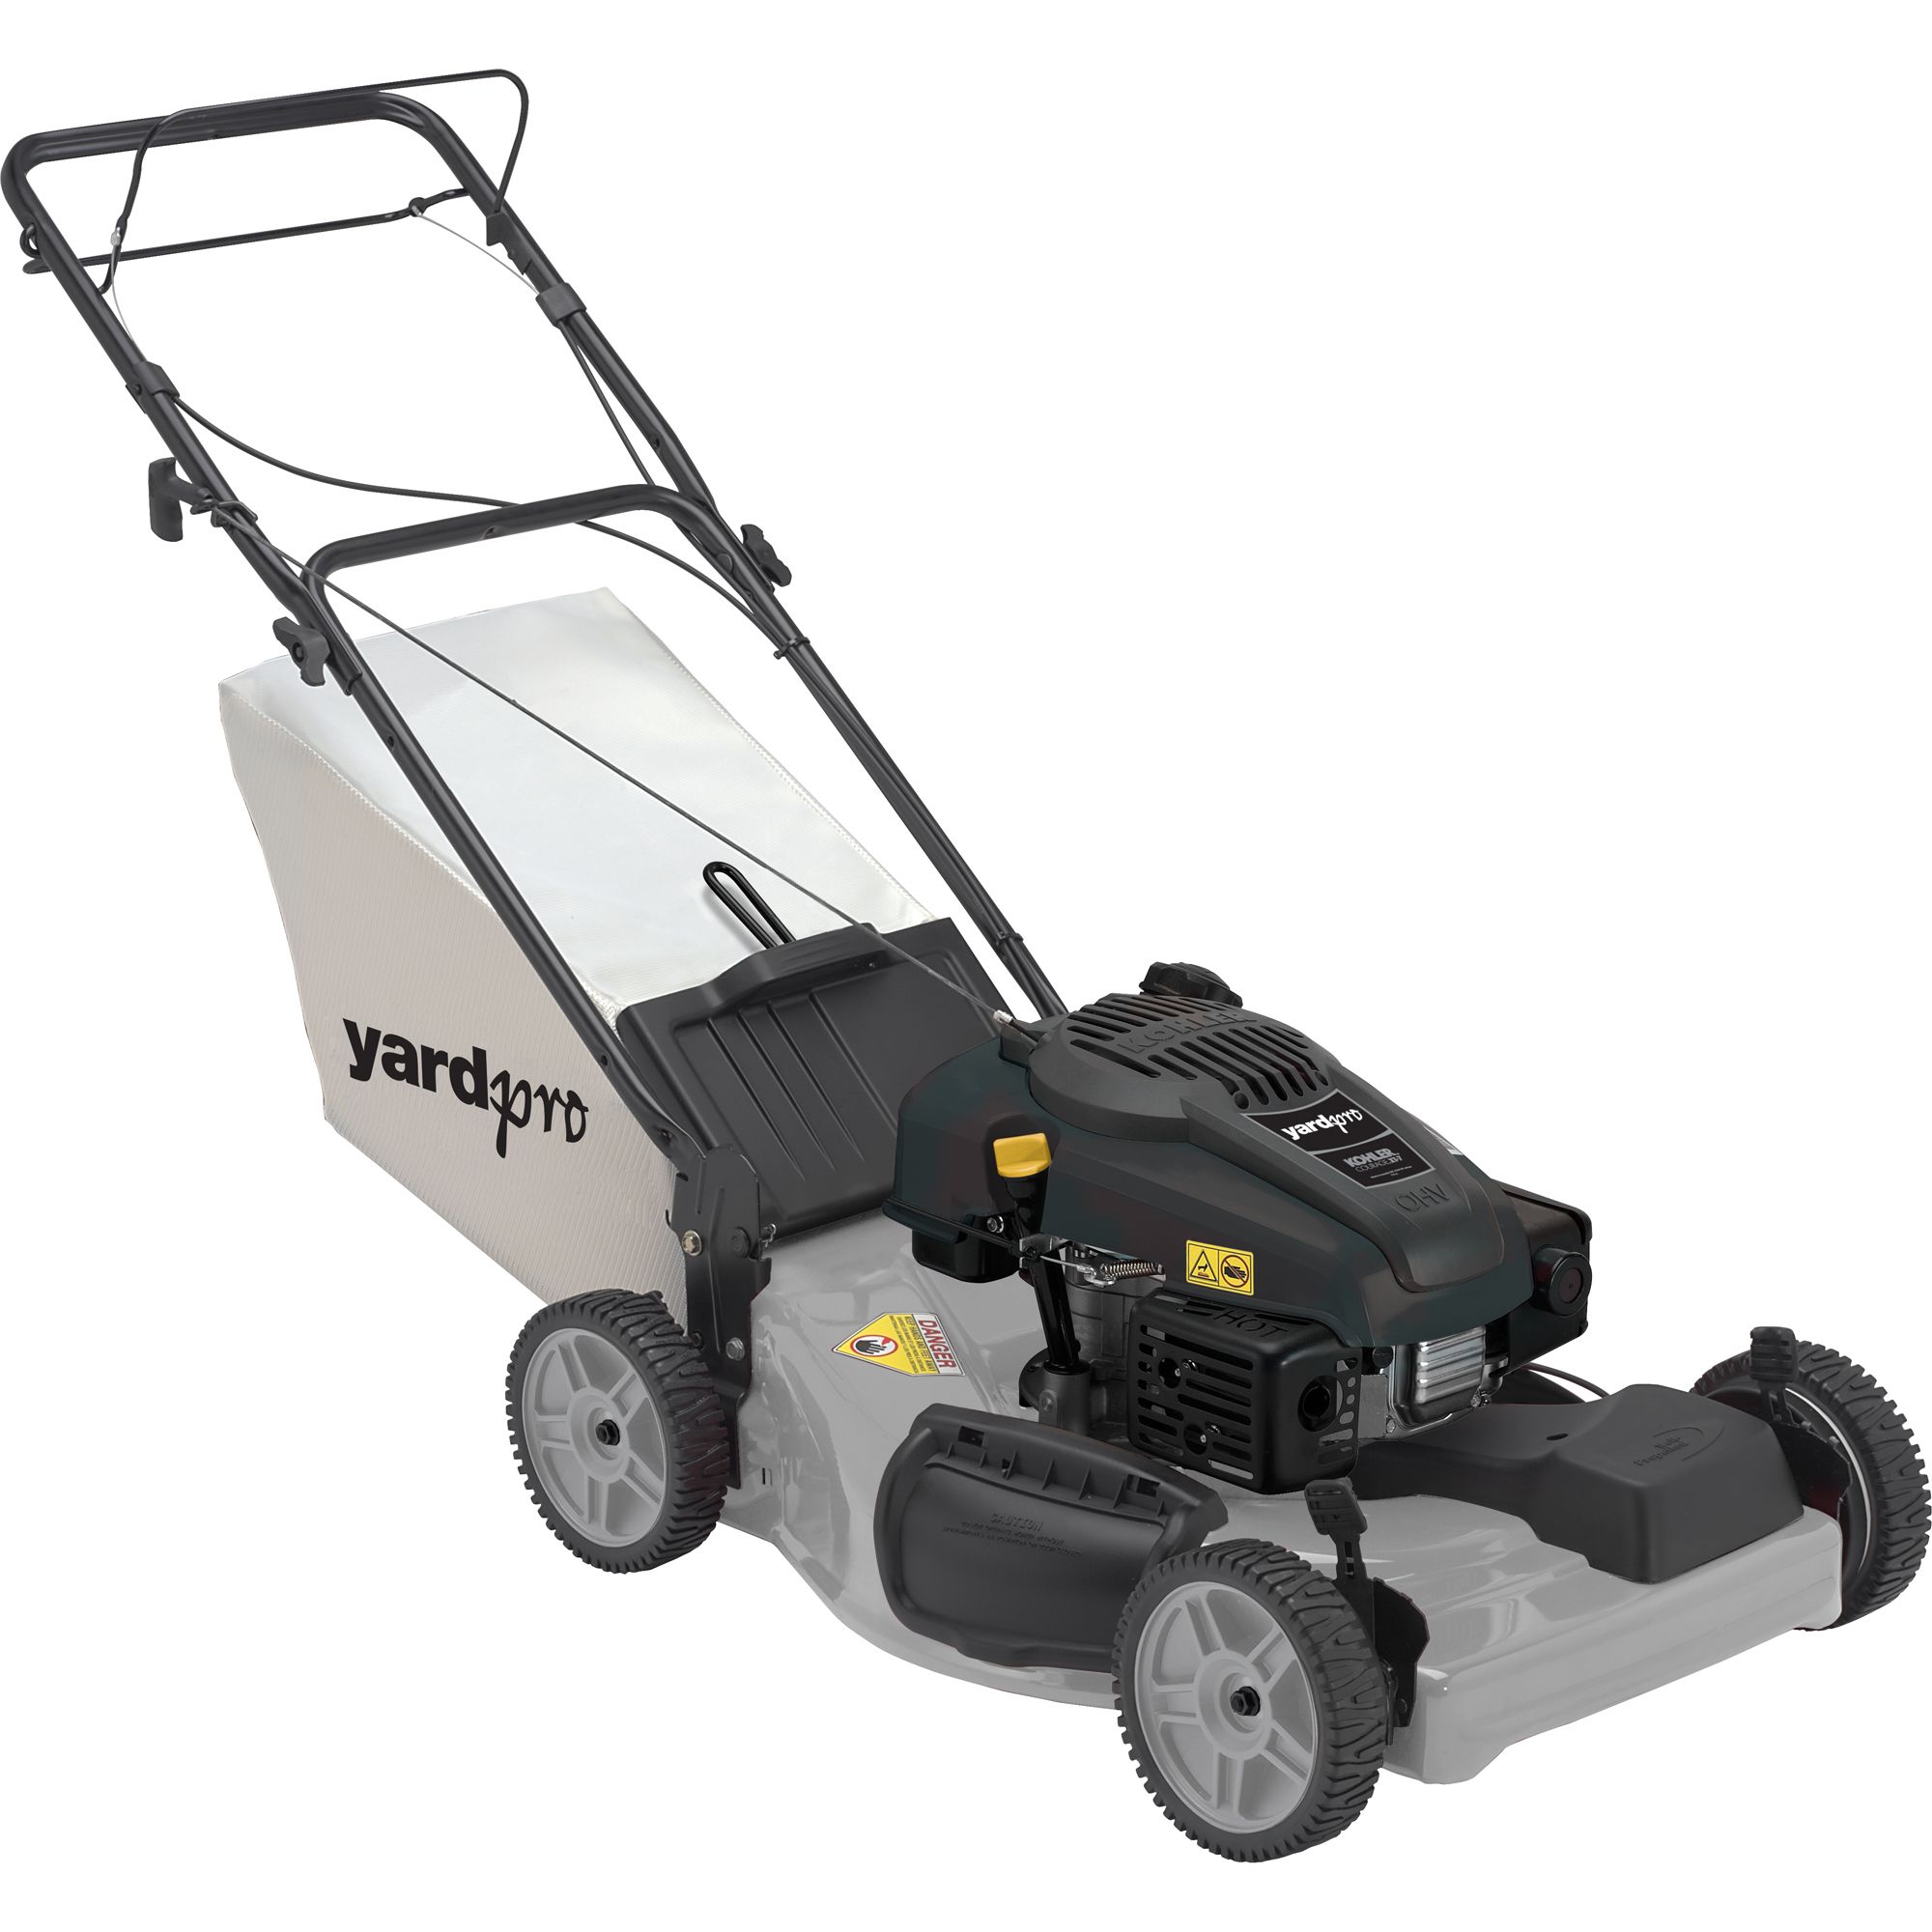 Yard Machines Front Propelled Rear Bag Lawn Mower